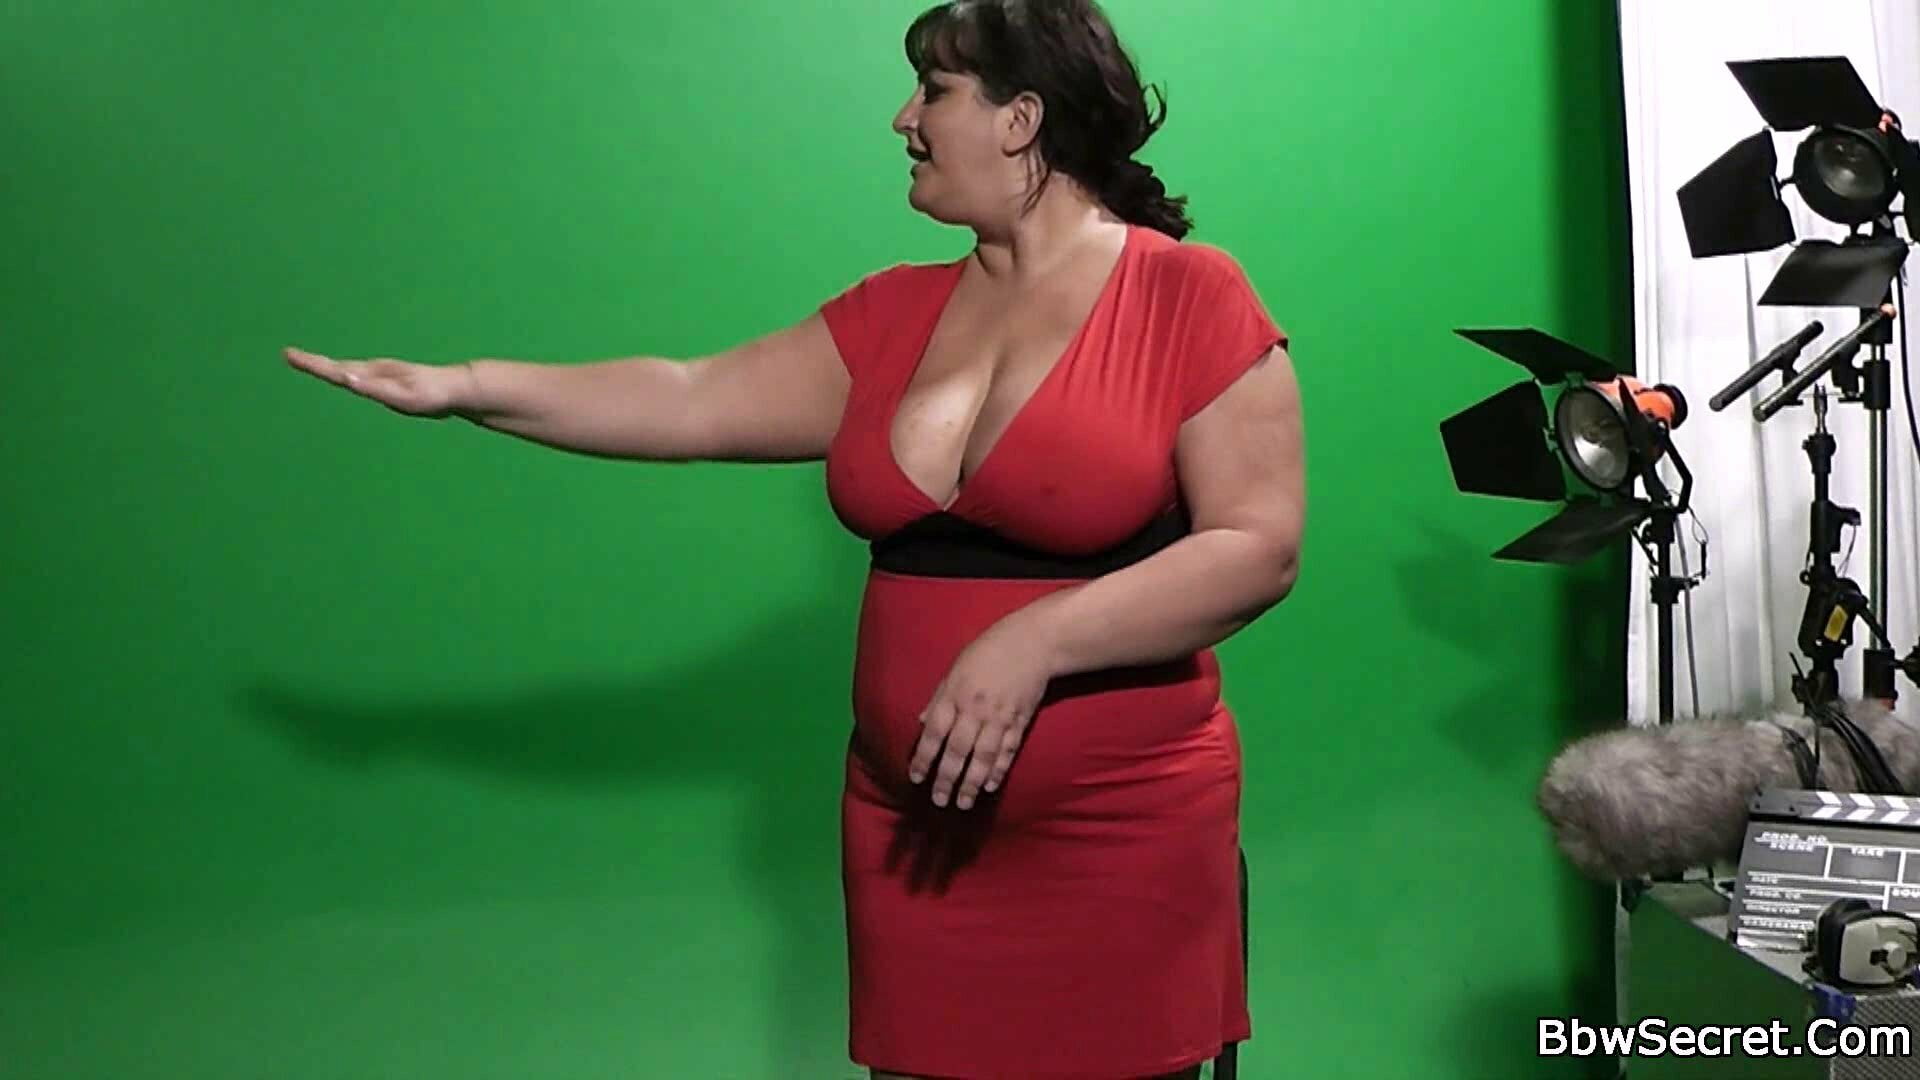 Woman with small tits flashing them in the greenroom